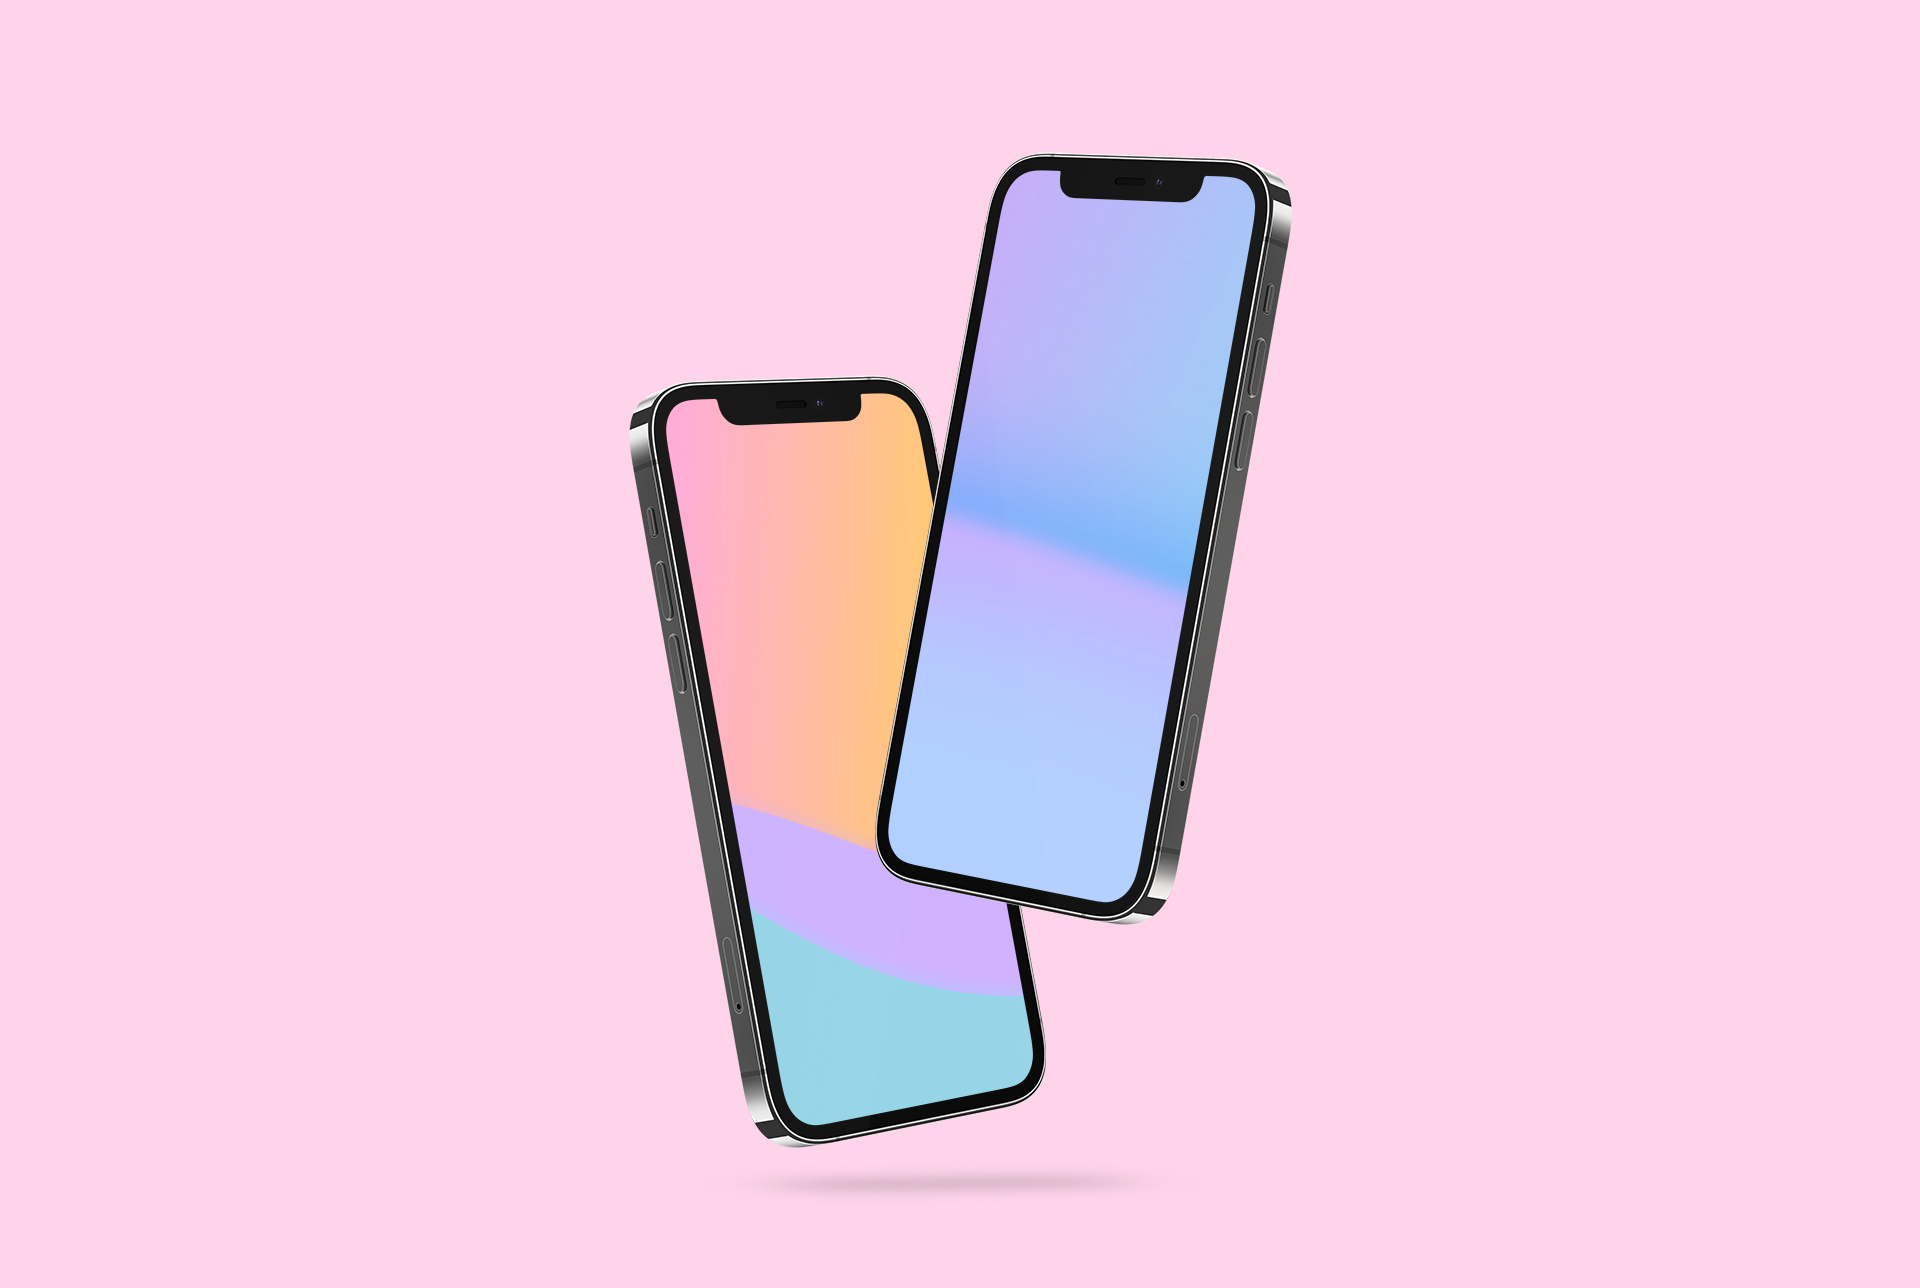 Abstract Gradient Hd Shapes Wallpapers